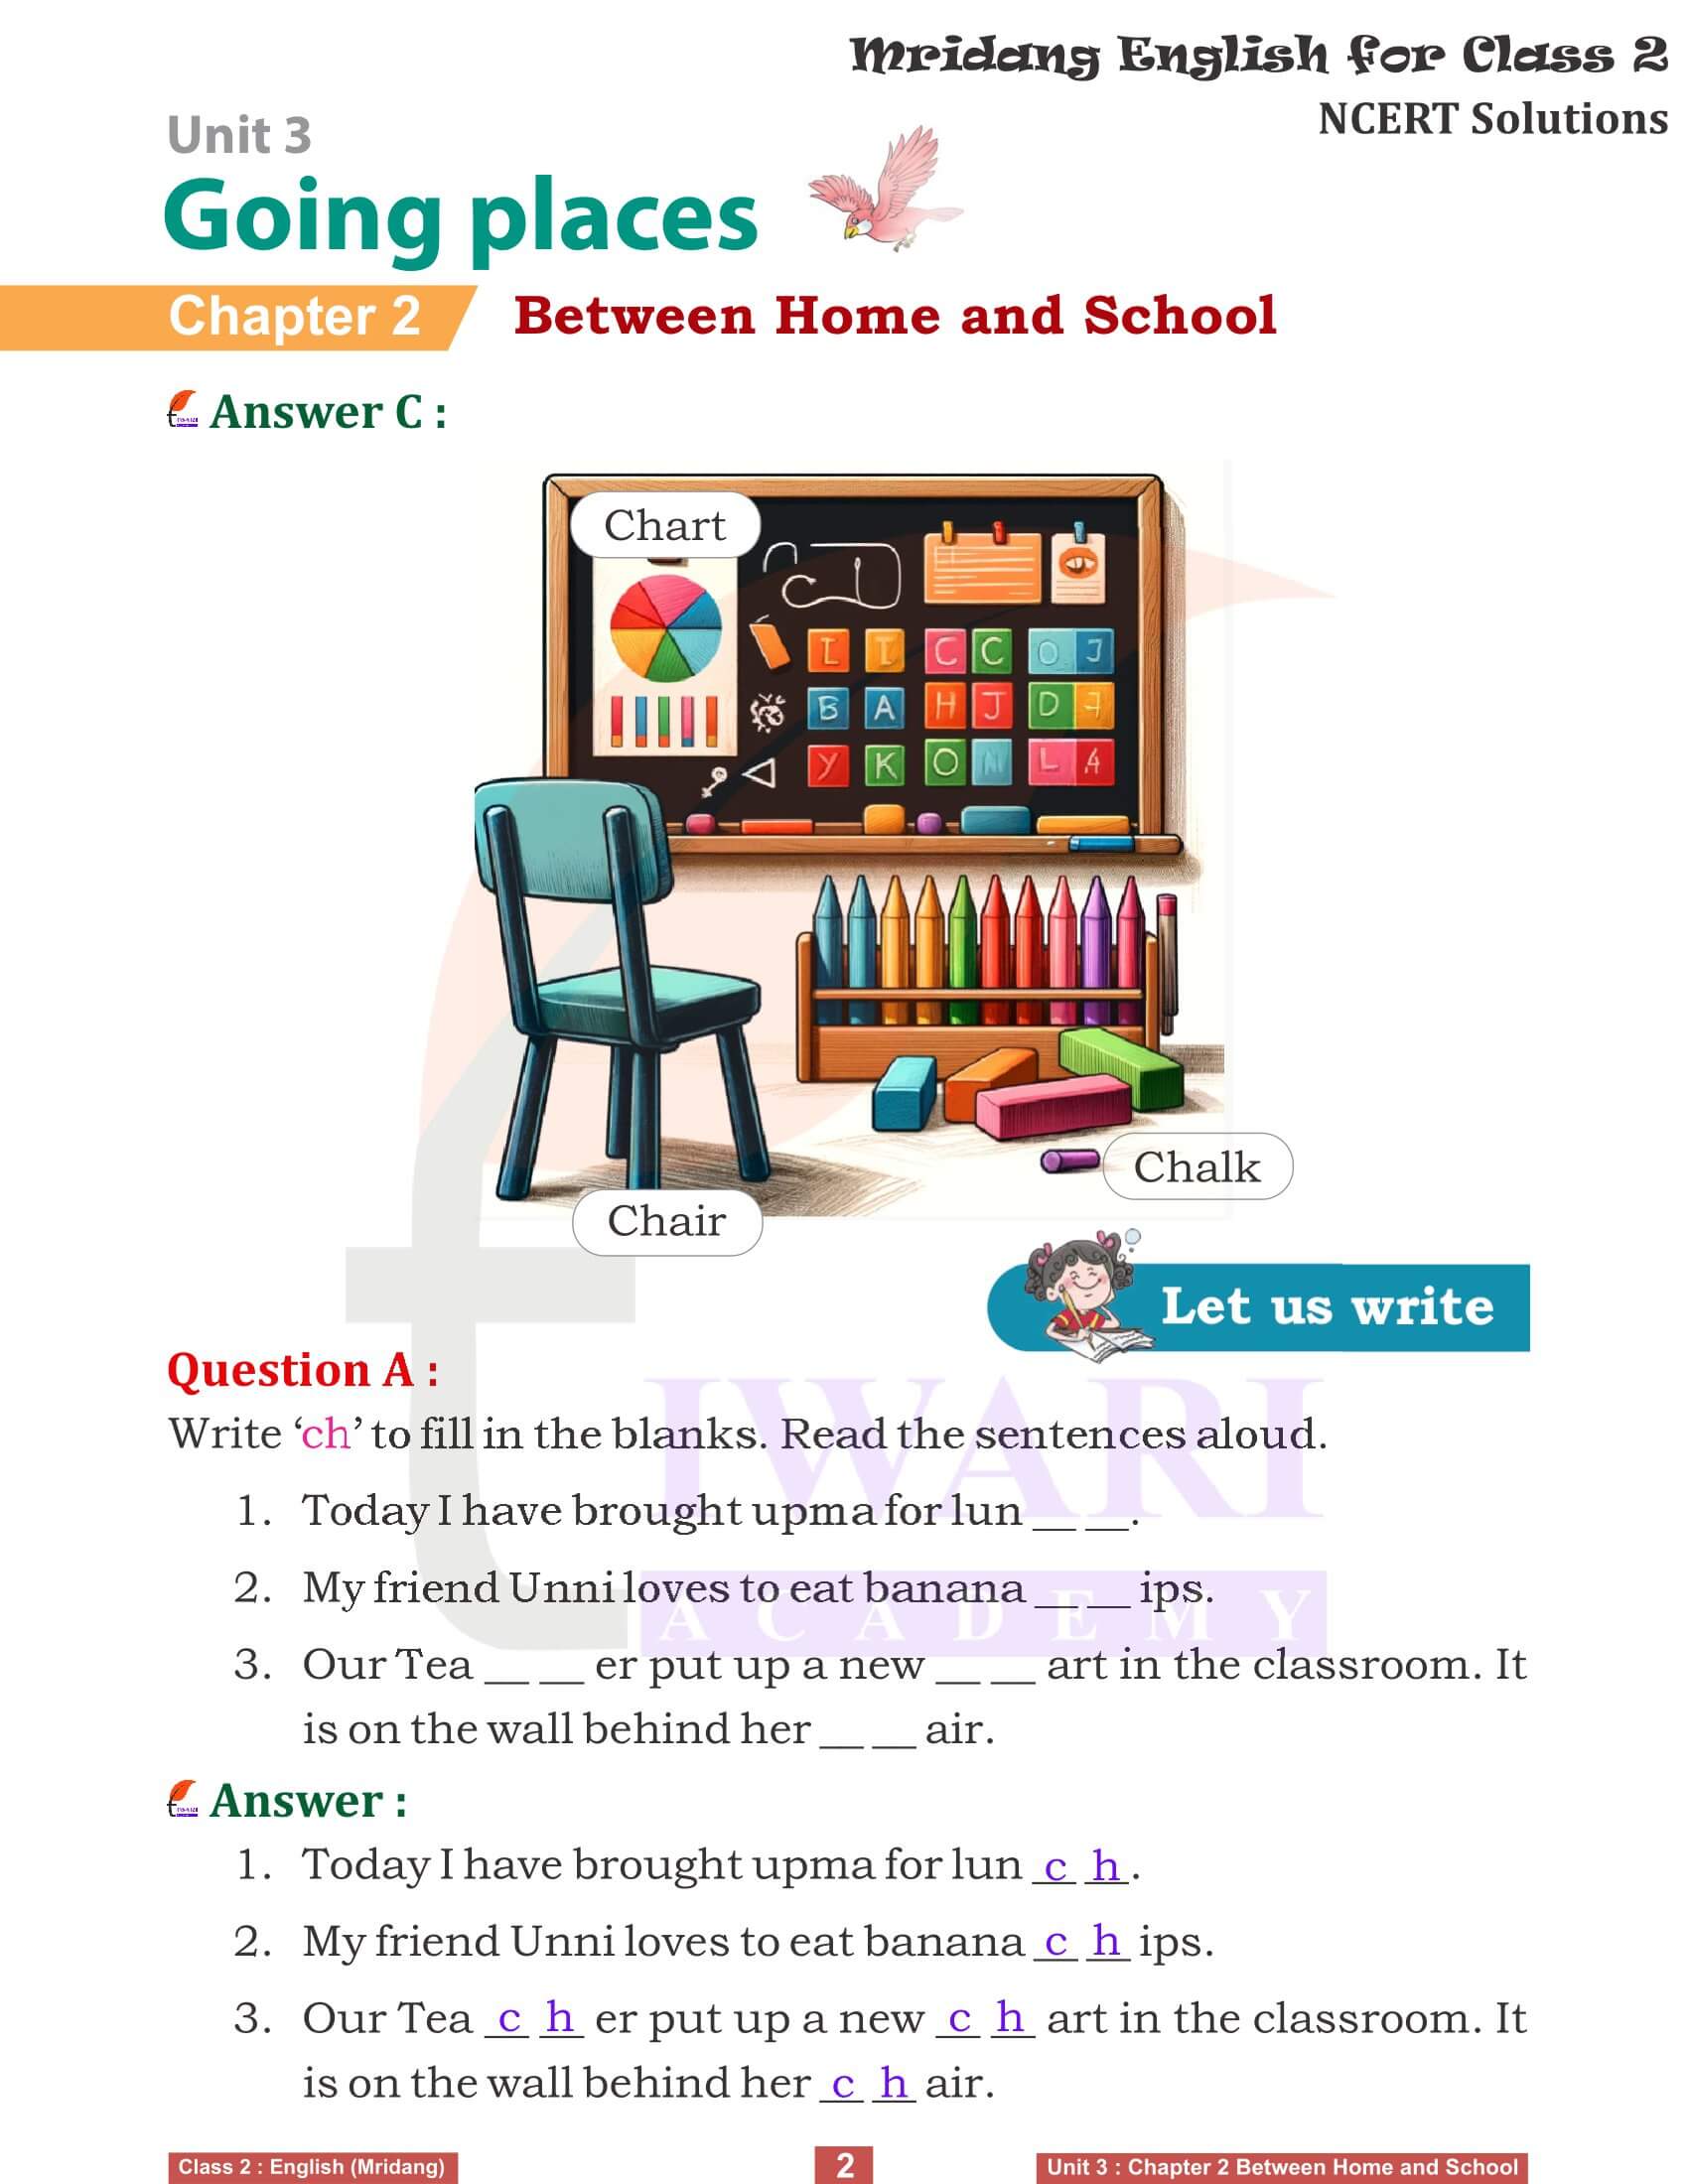 NCERT Solutions for Class 2 English Mridang Unit 3 Going Places Come Back Chapter 2